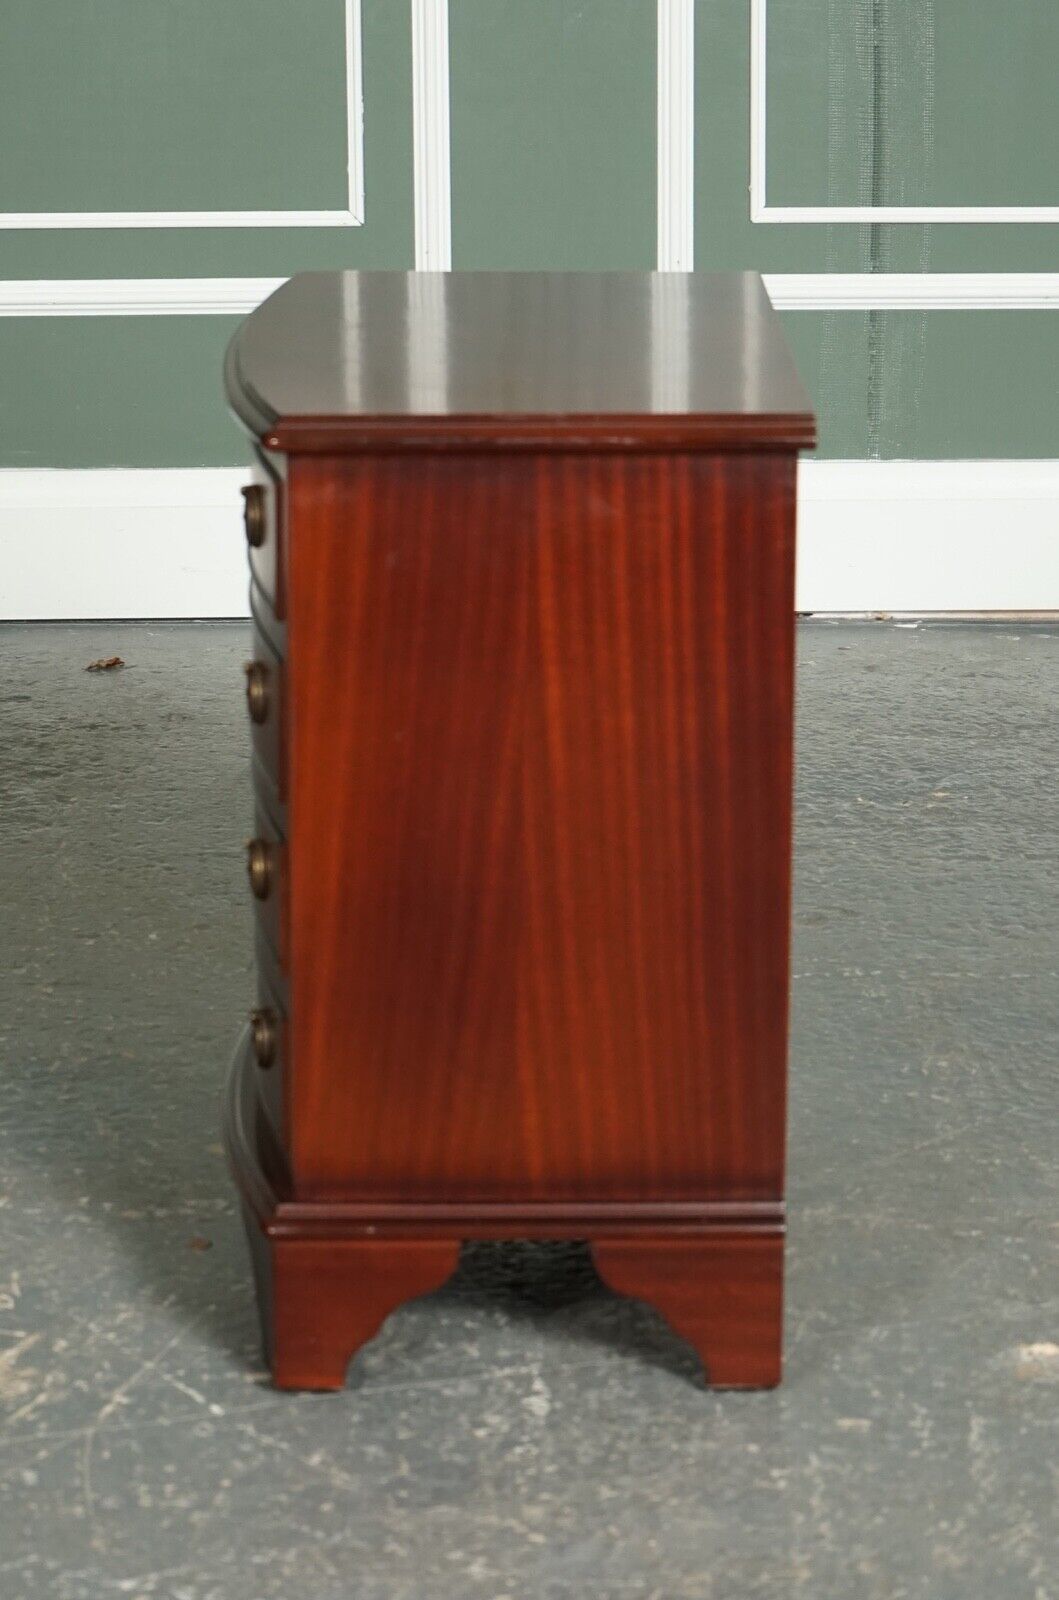 VINTAGE FLAMED MAHOGANY GEORGIAN STYLE CHEST OF DRAWERS END LAMP TABLE